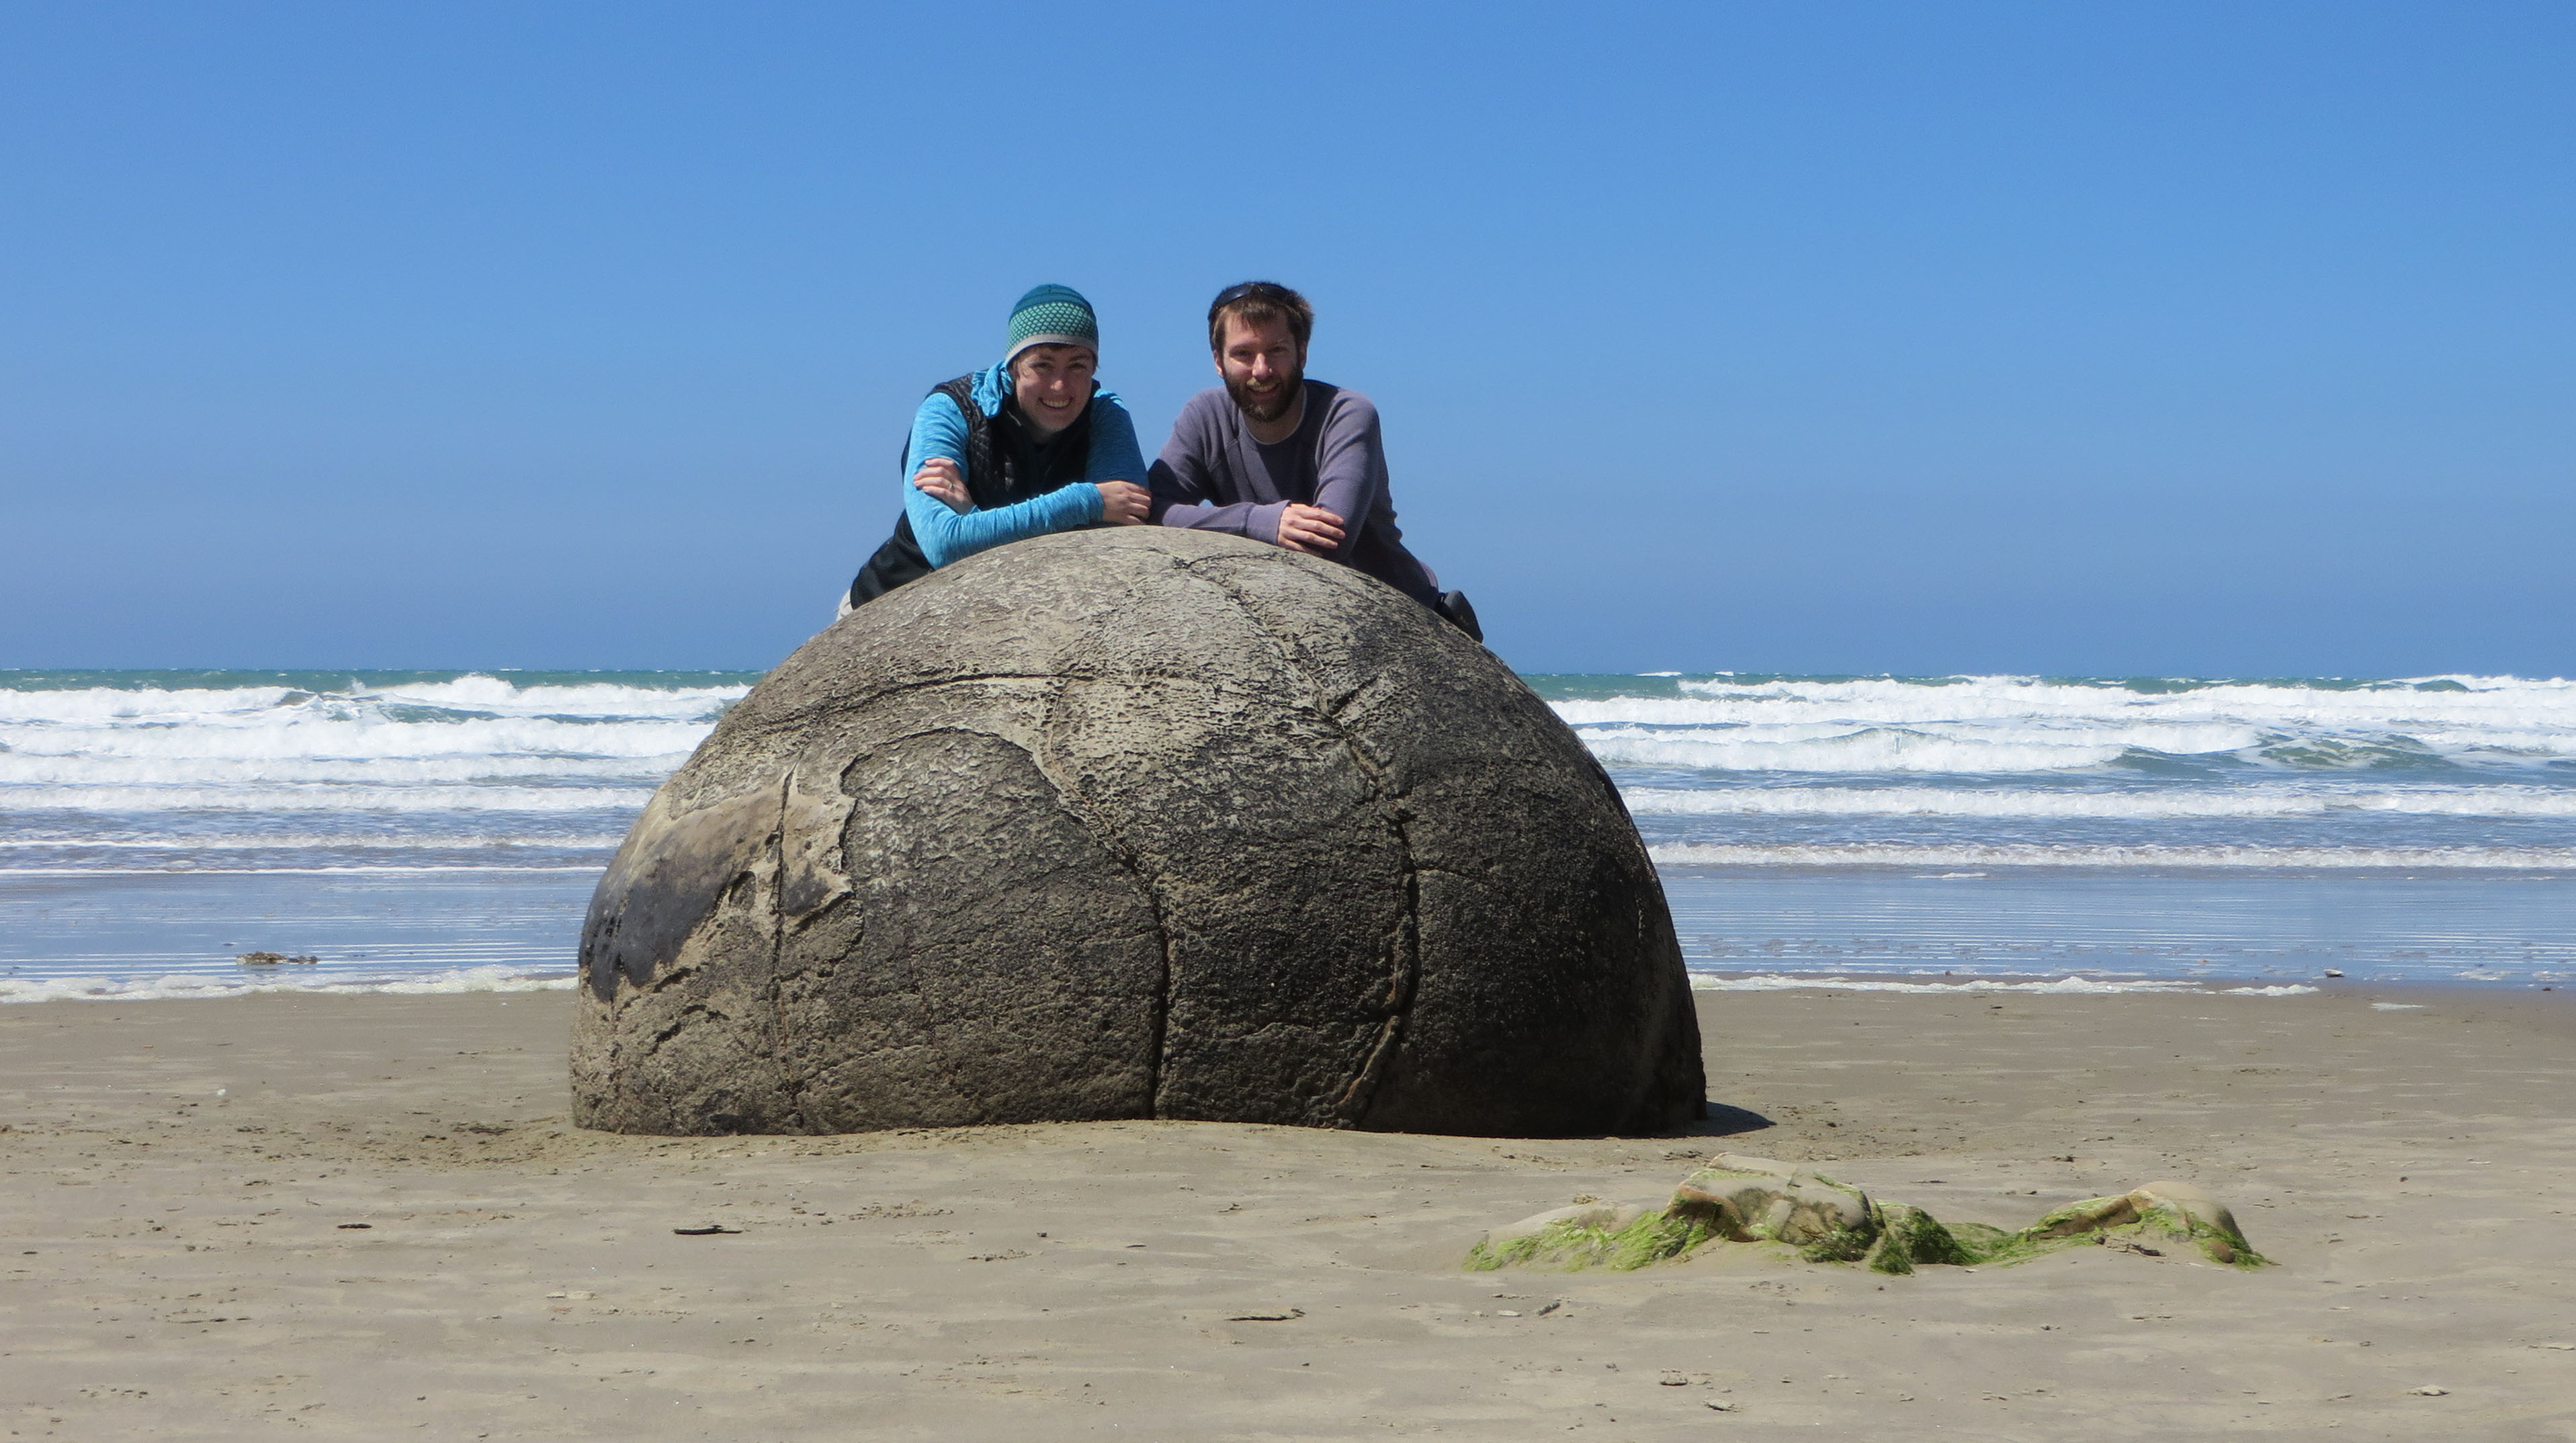 Katie, a white woman on the left, and Ben, a white man on the right, are leanding on a giant spherical boulder close together. Katie is wearing a light blue long sleeved top, a black vest, and a teal and seafoam green pattered hat. Ben is wearing a grayish-purple long sleeve top with sunglasses on the top of his head. He has brown hair and a short, trim beard and mustache. Both people are smiling. Most of the foreground is sand, but on the rightside is an oddly shaped rock with some lime green moss. In the background is the ocean and you can see several sets of docile waves rolling in.